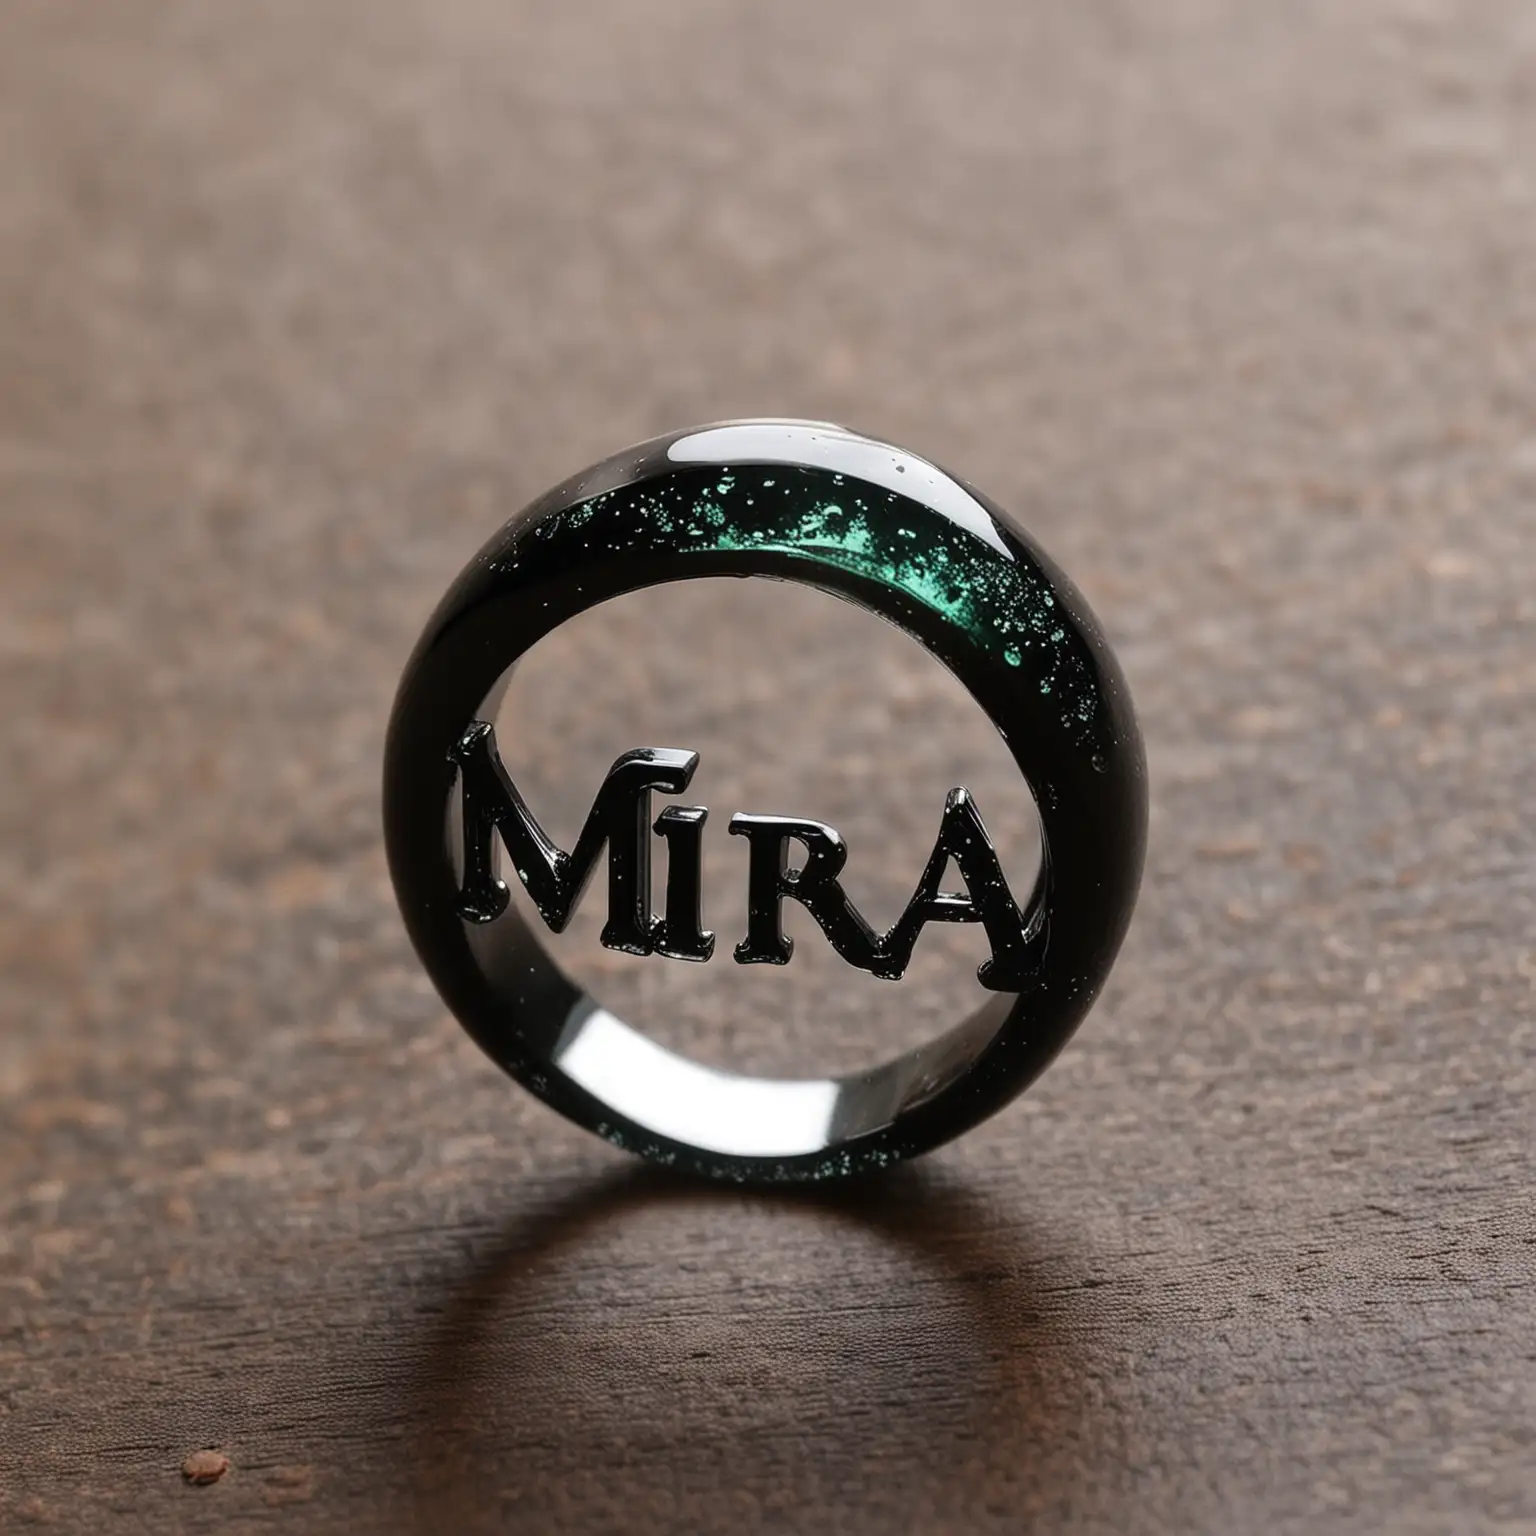 resin ring with this name on it "mira" with dark shadow backgranod for ig